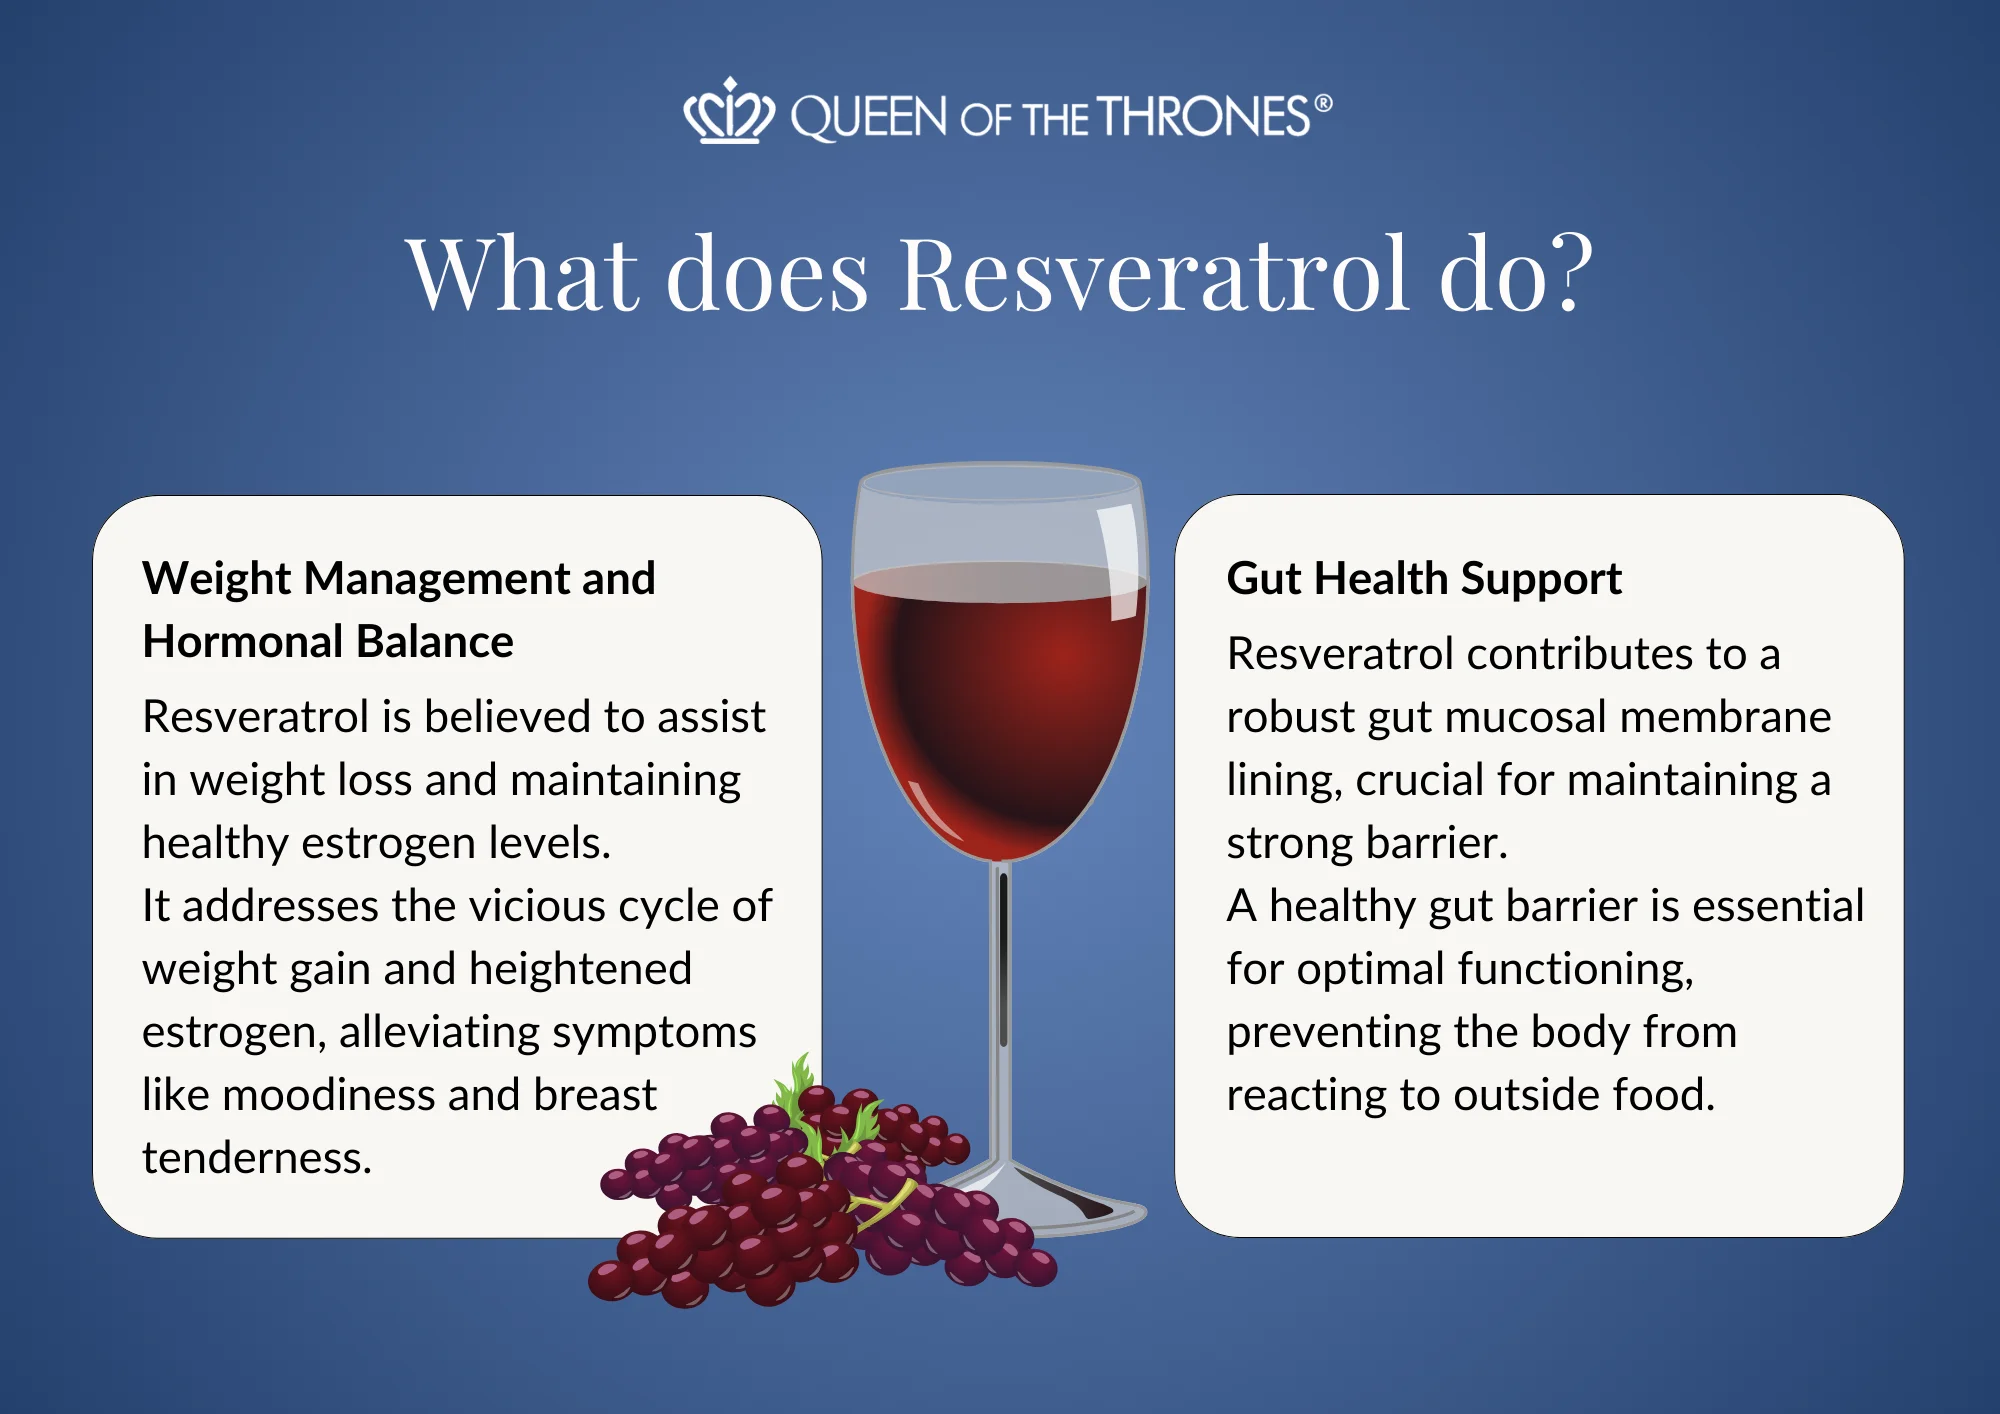 What does resveratrol do by Queen of the Thrones